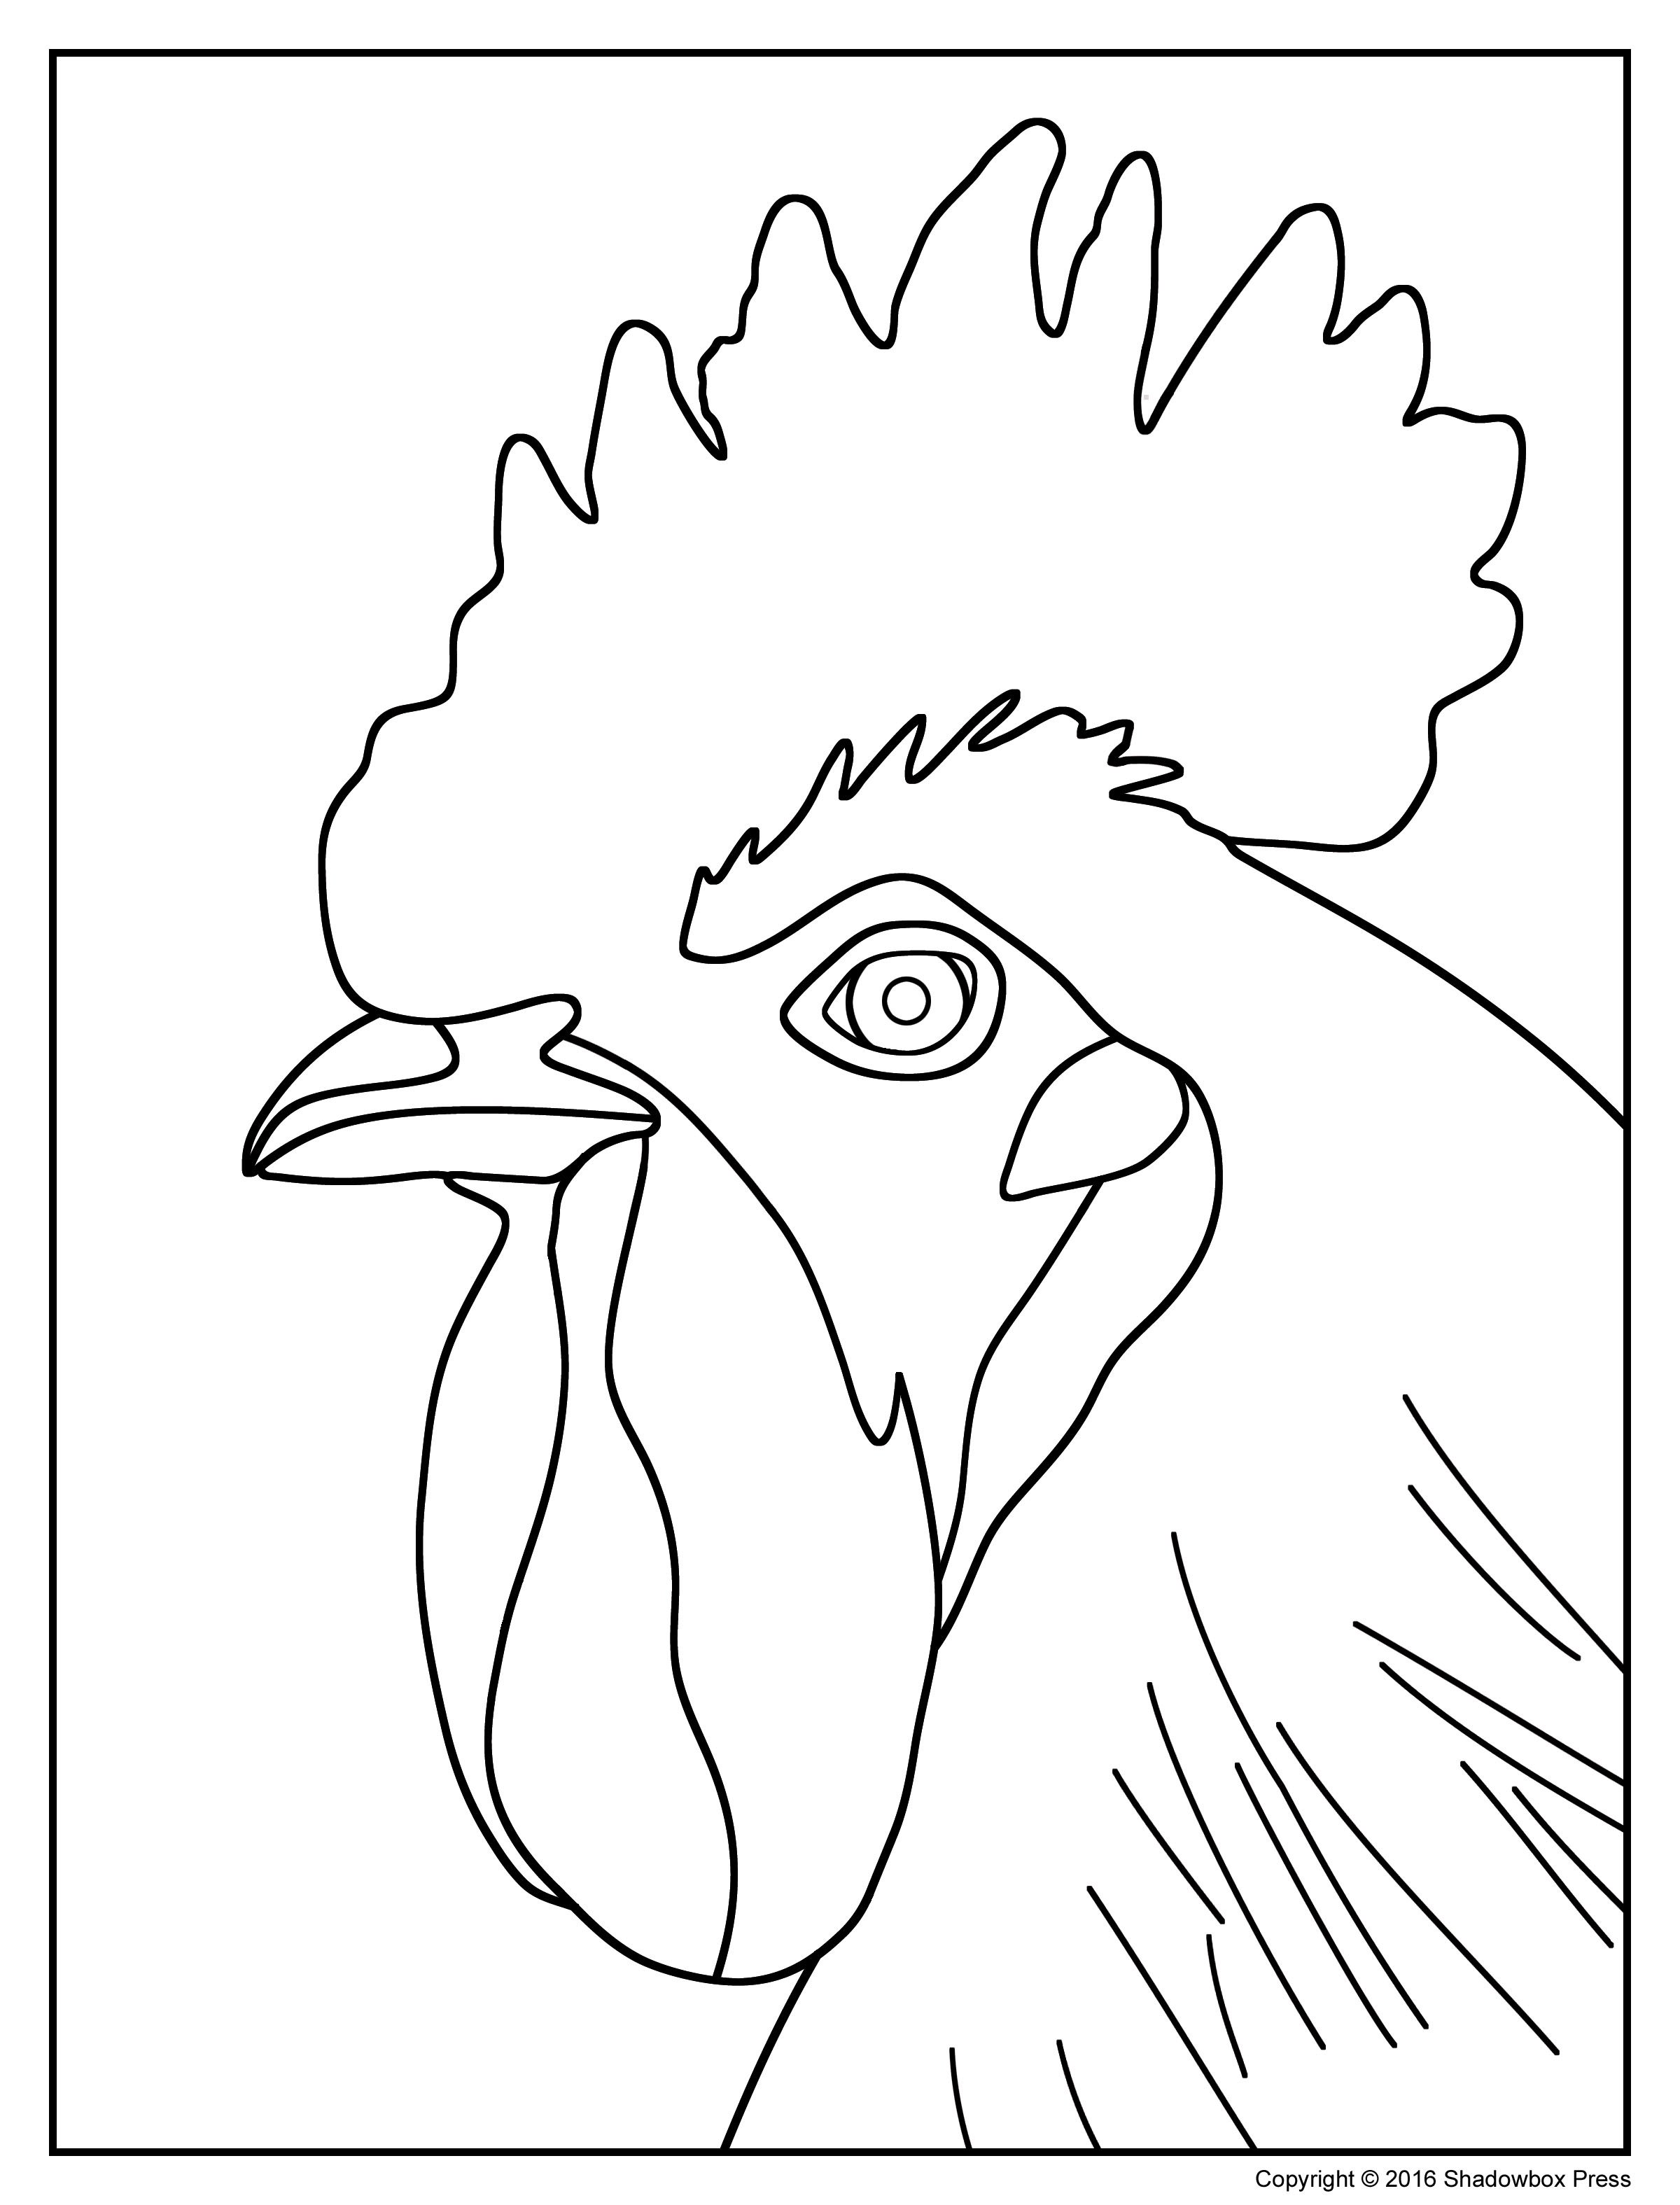 coloring-pages-for-older-adults-at-getdrawings-free-download